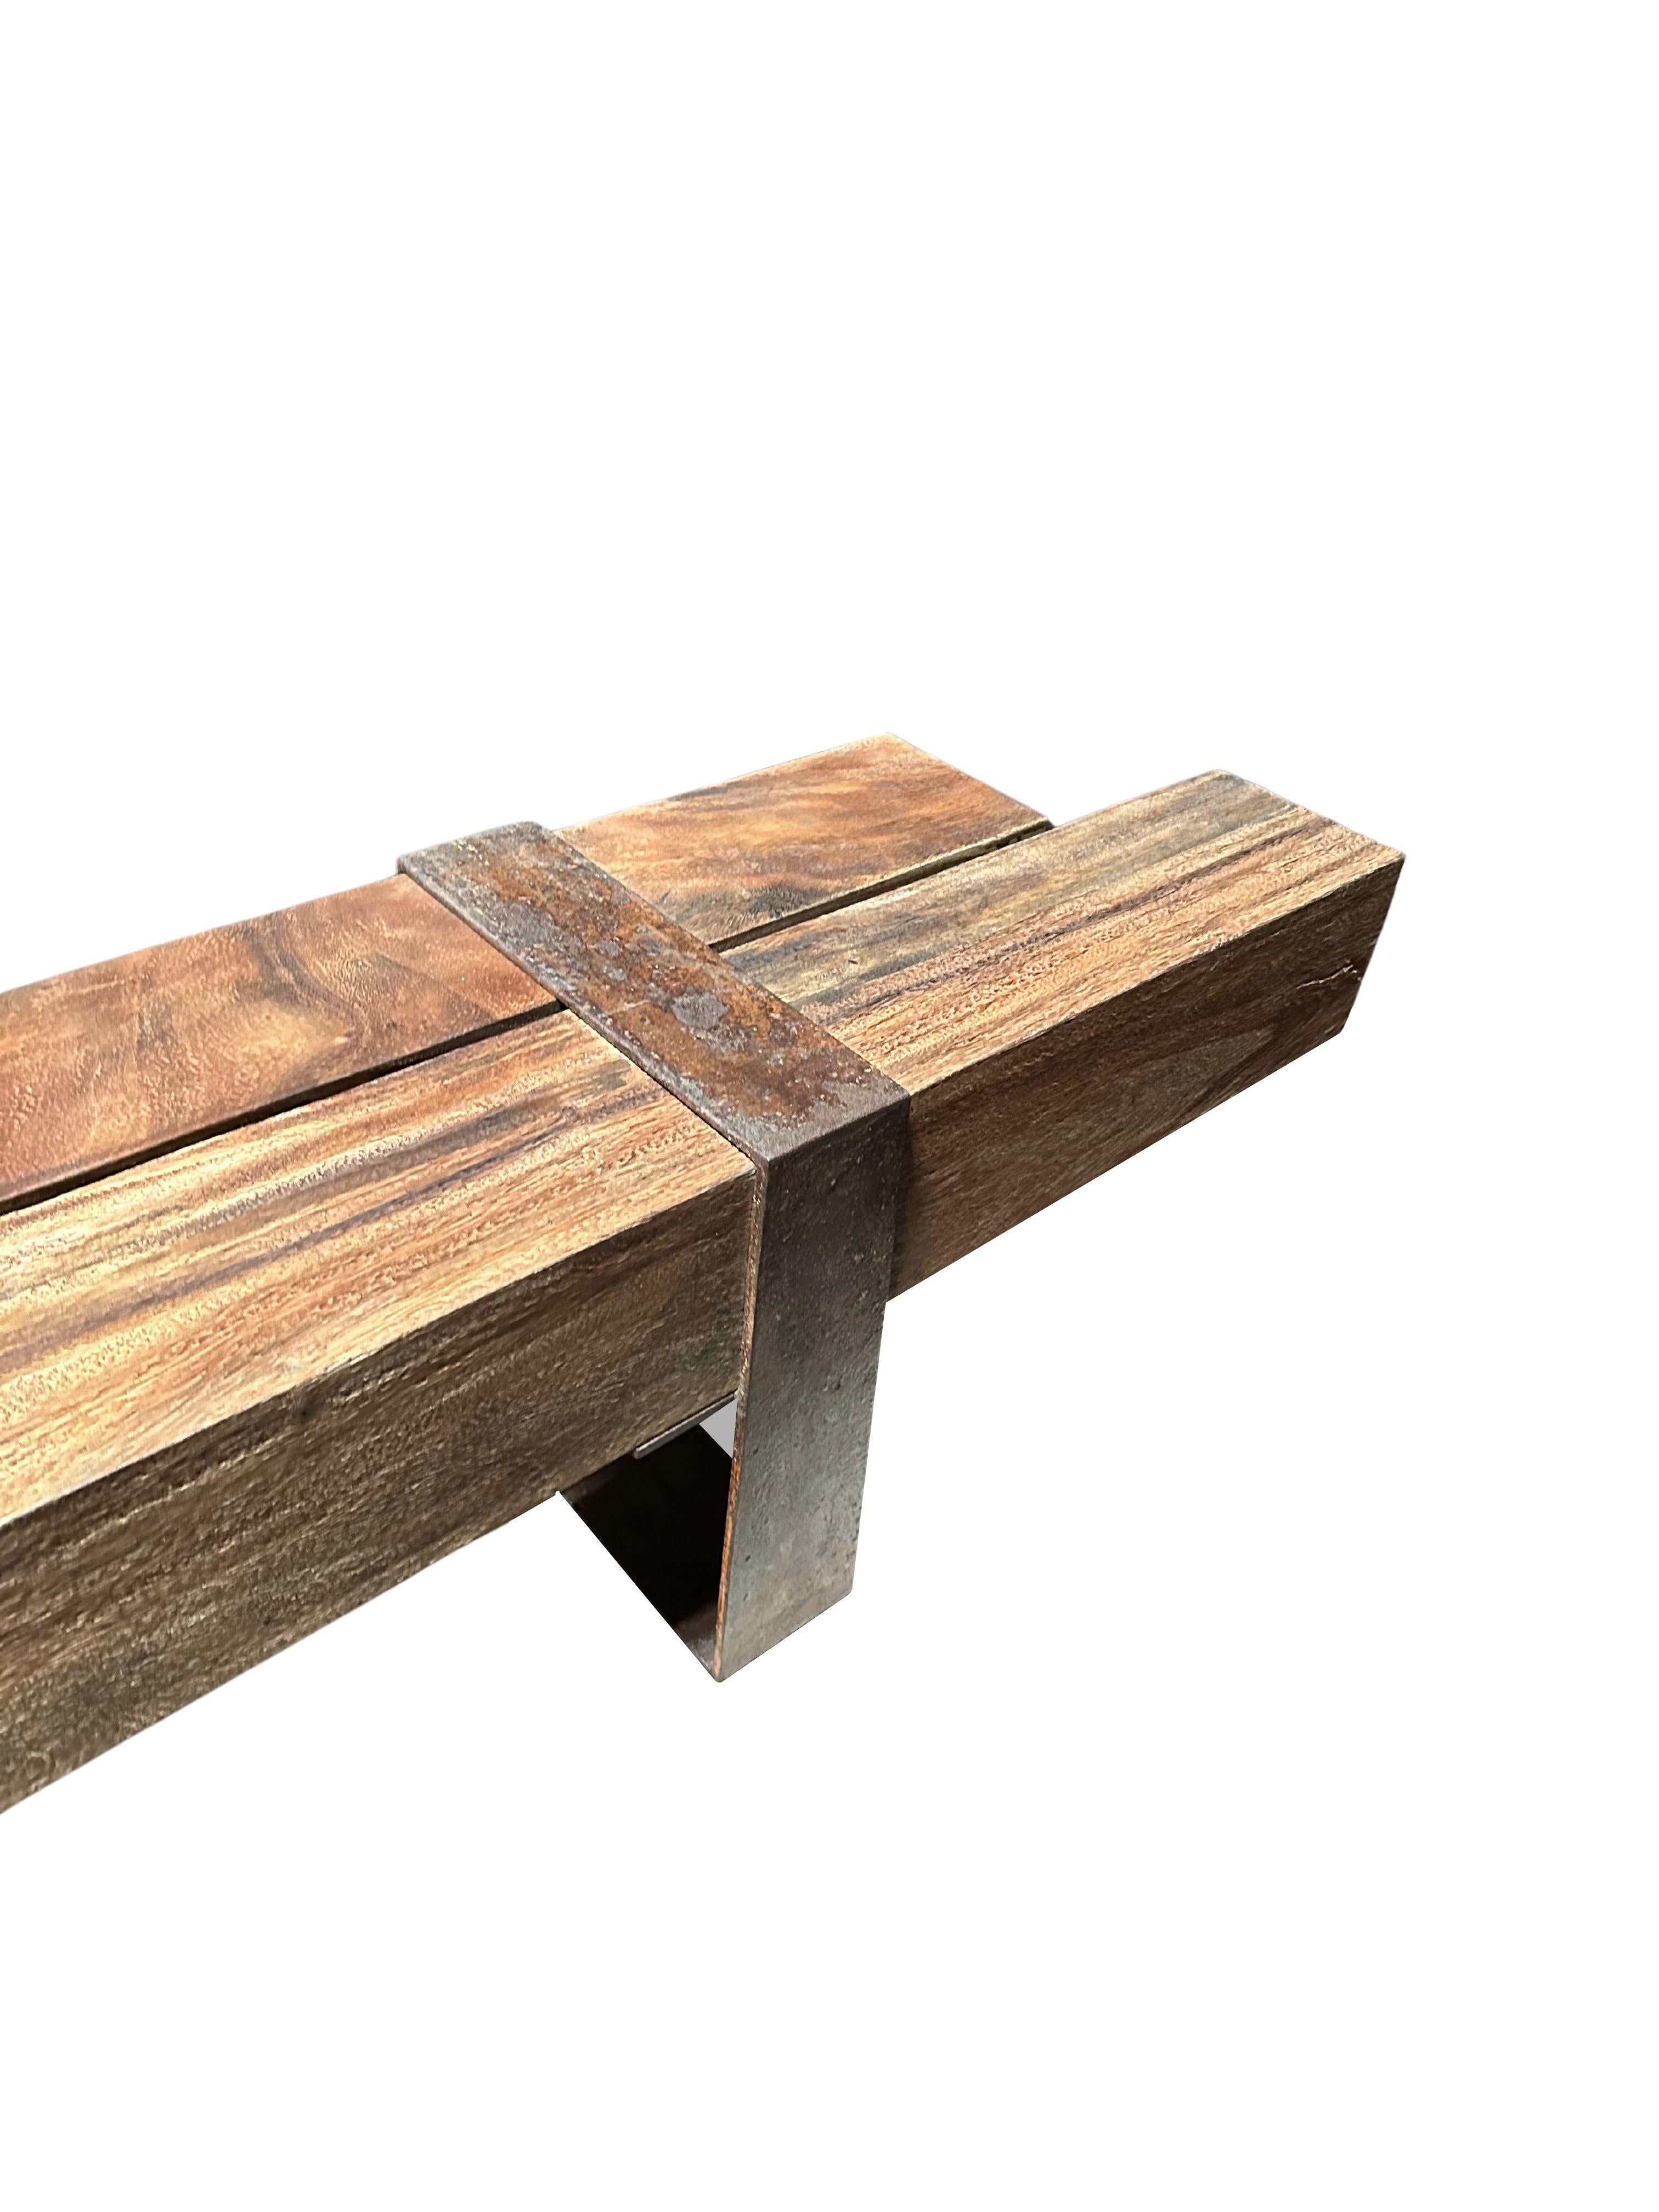 Hand-Carved Sculptural Suar Wood Bench with Steel legs, Modern Organic For Sale